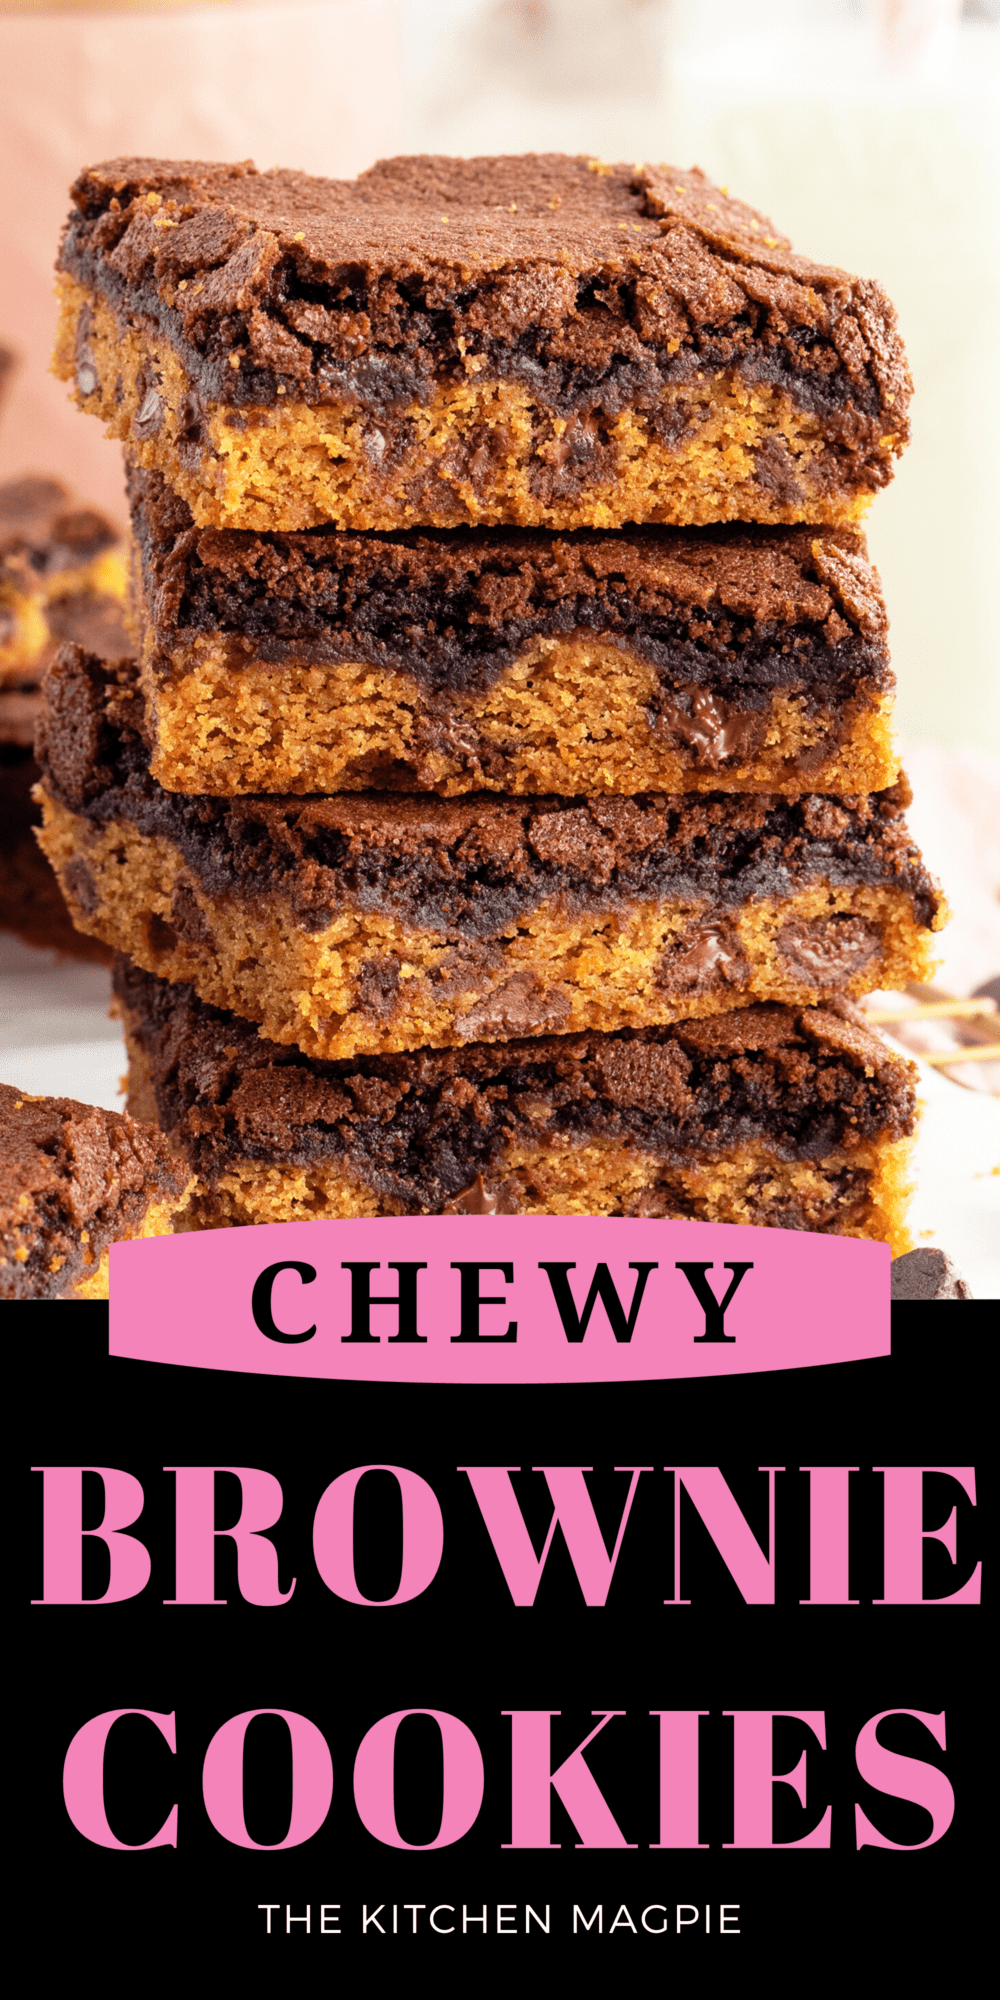 This recipe combines cookies and brownies in a tasty double layer, ensuring that everyone is happy, whether they prefer cookies or brownies.